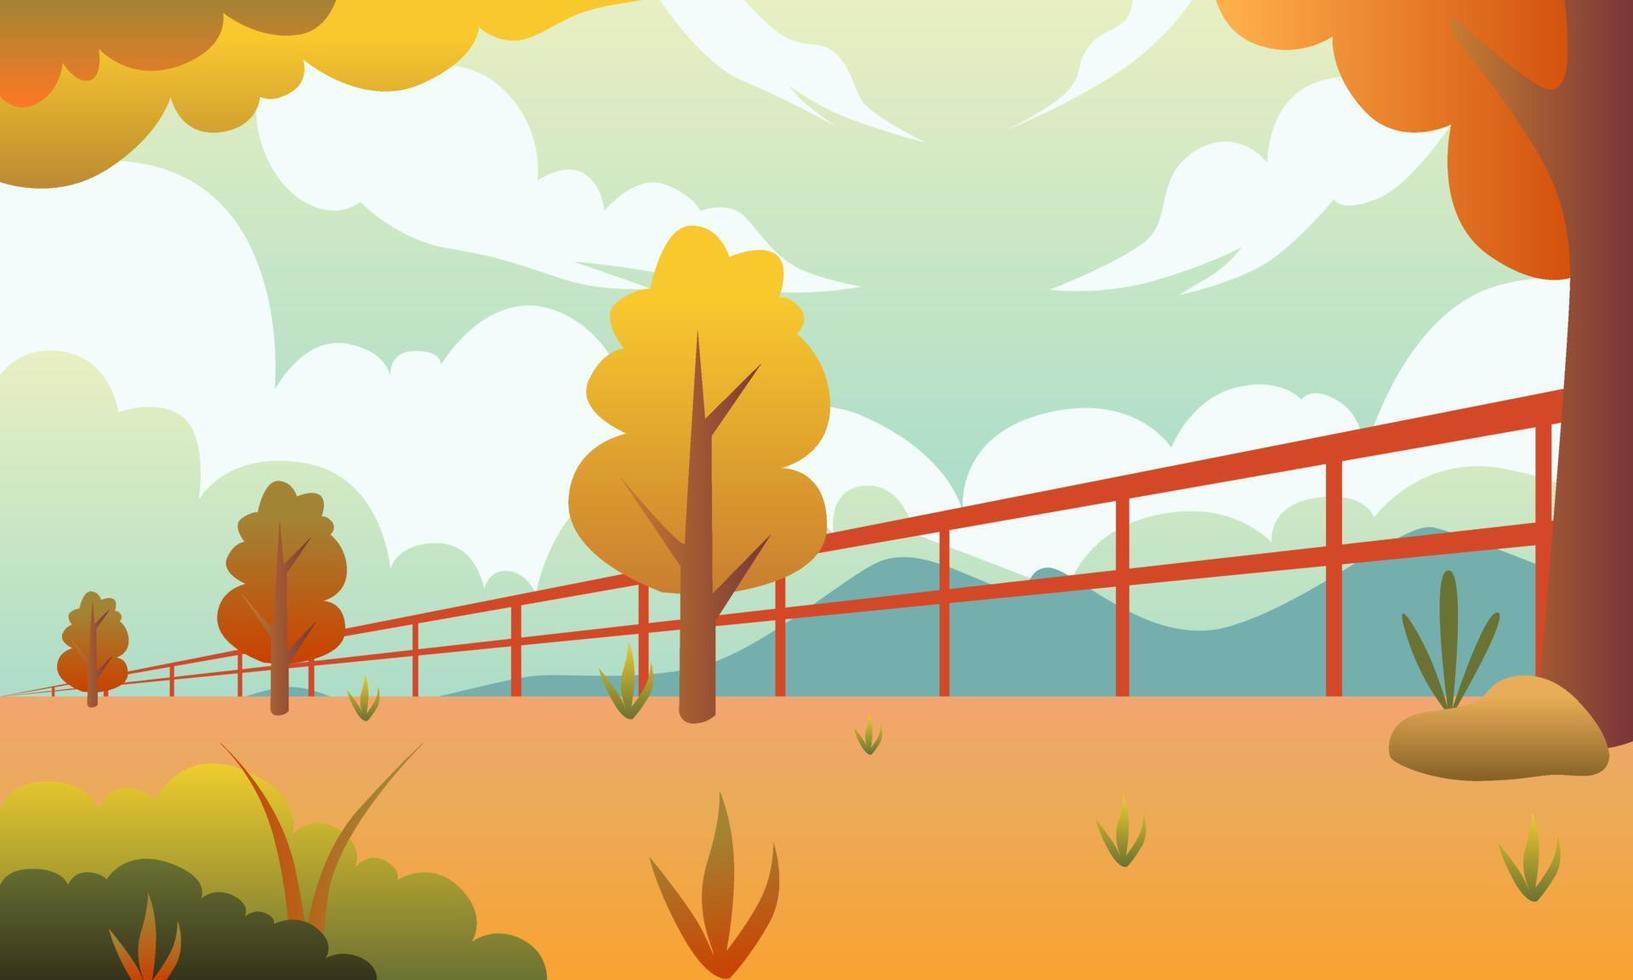 Autumn panoramic illustration vector background. Falling leaves with orange sky. Farm Illustration cloudy scene